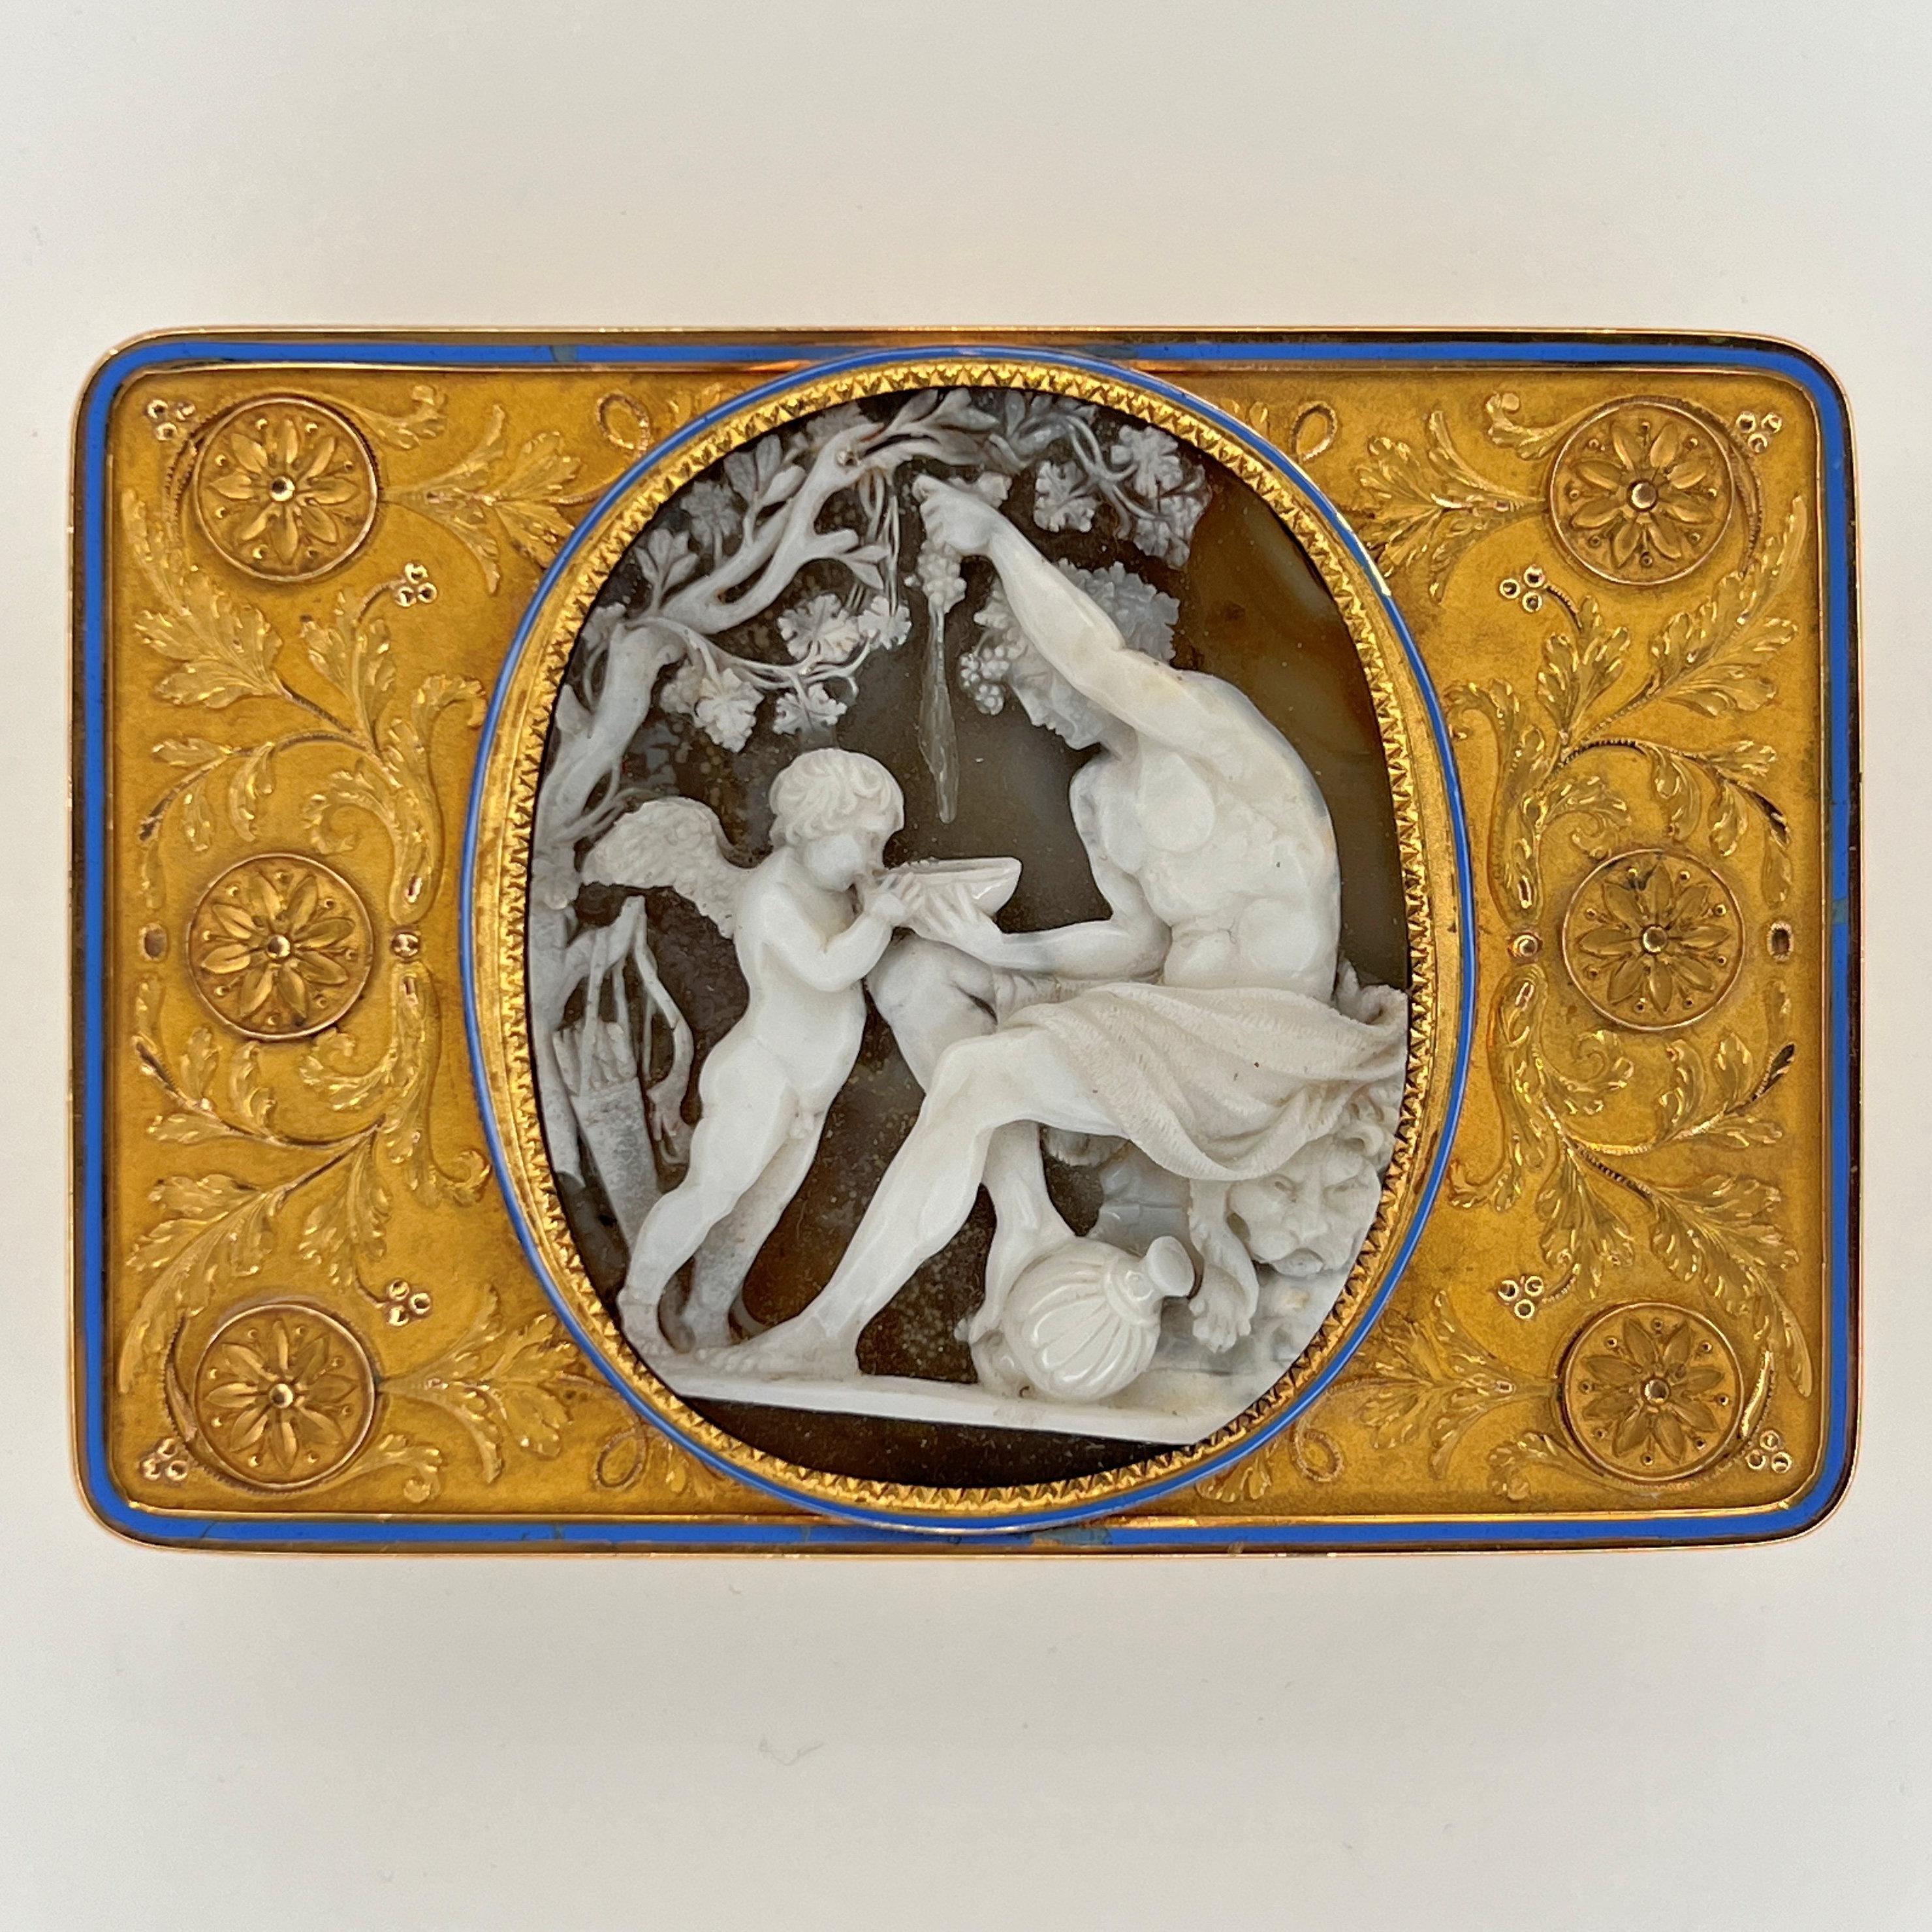 Our wonderful snuff box features a finely carved agate relief depicting Bacchus and Cupid, scrolling foliate motifs and roundels against a matte ground, and cover with blue enamel border.  Interior with the stamped marks for St. Petersburg, the